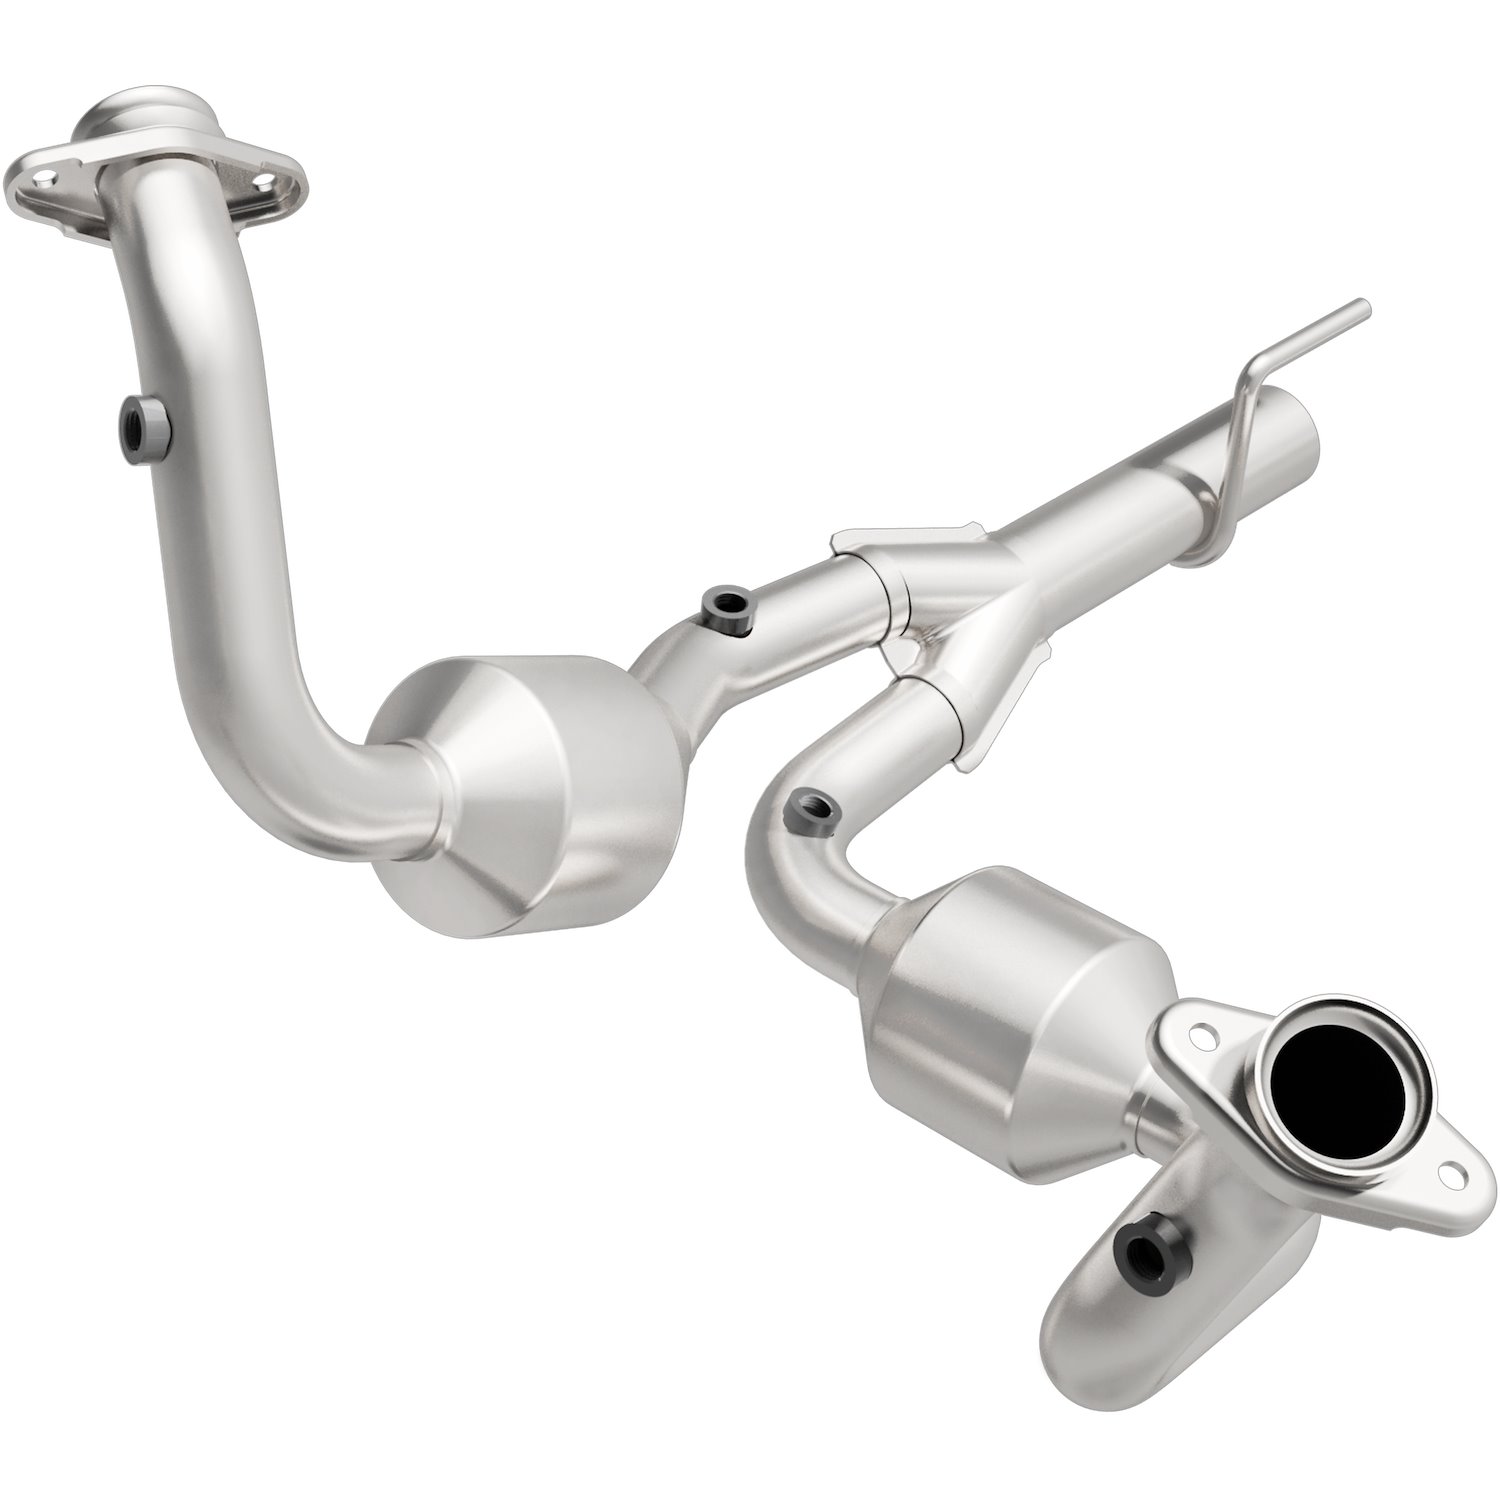 2002-2004 Jeep Grand Cherokee OEM Grade Federal / EPA Compliant Direct-Fit Catalytic Converter